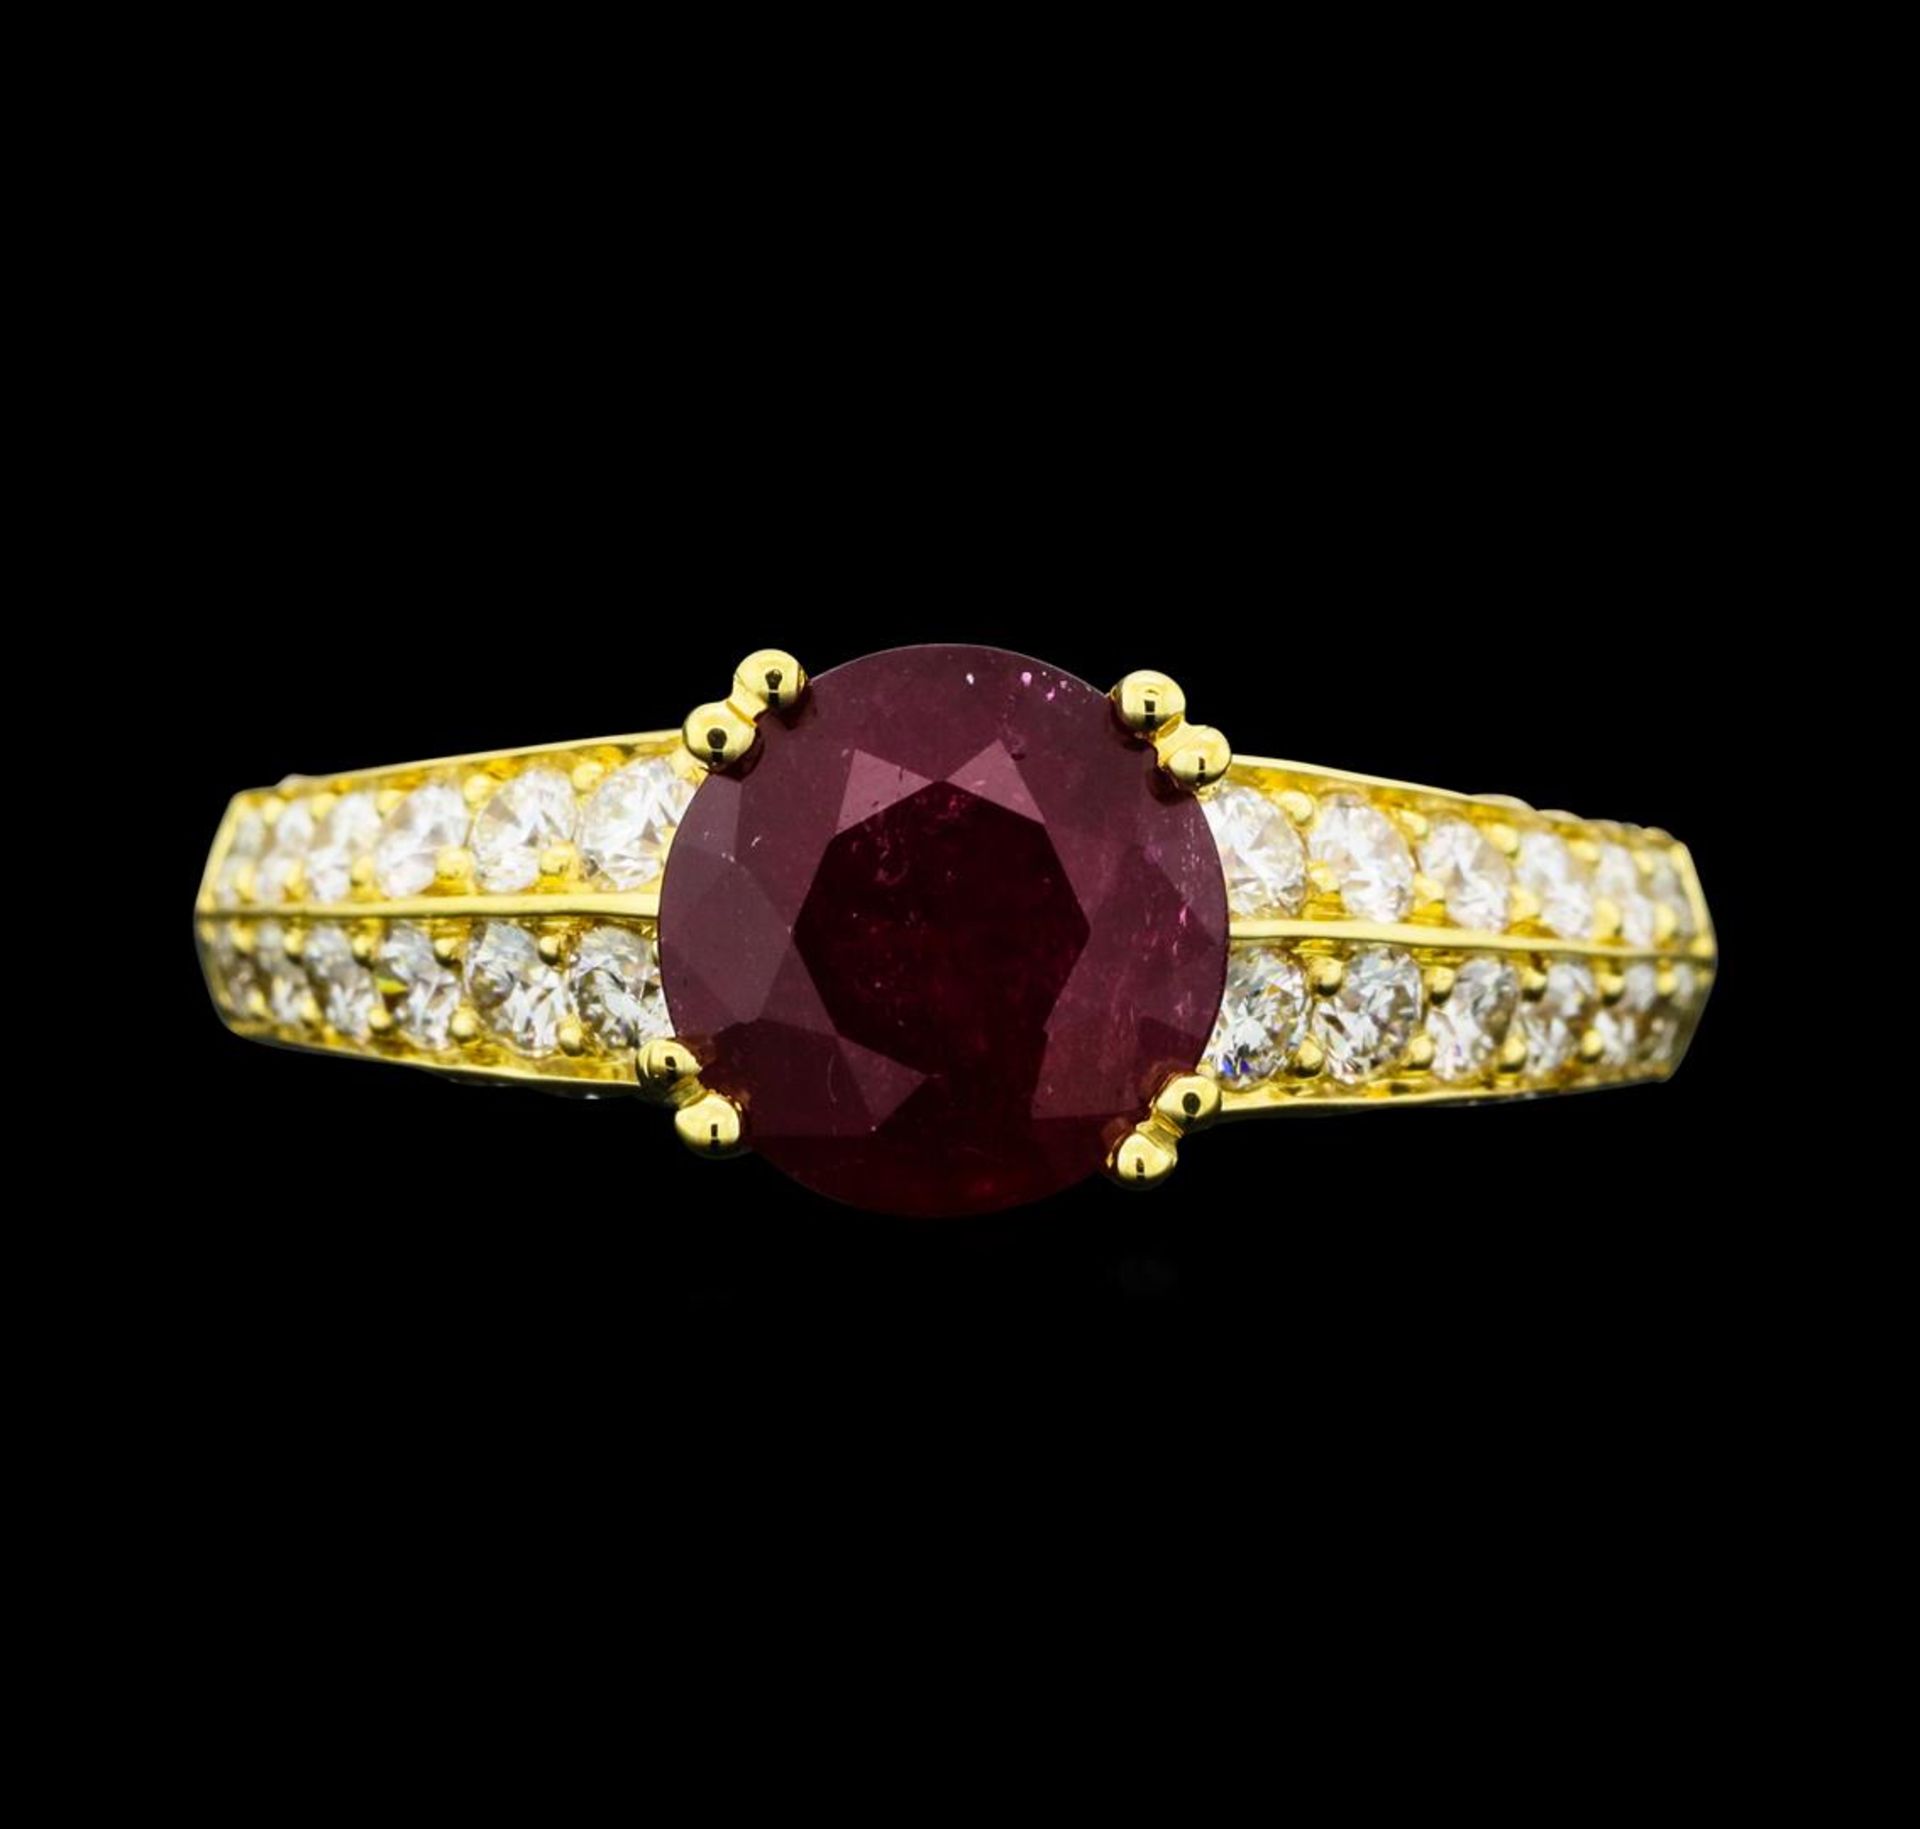 2.54 ctw Ruby And Diamond Ring - 18KT Yellow Gold - Image 2 of 5